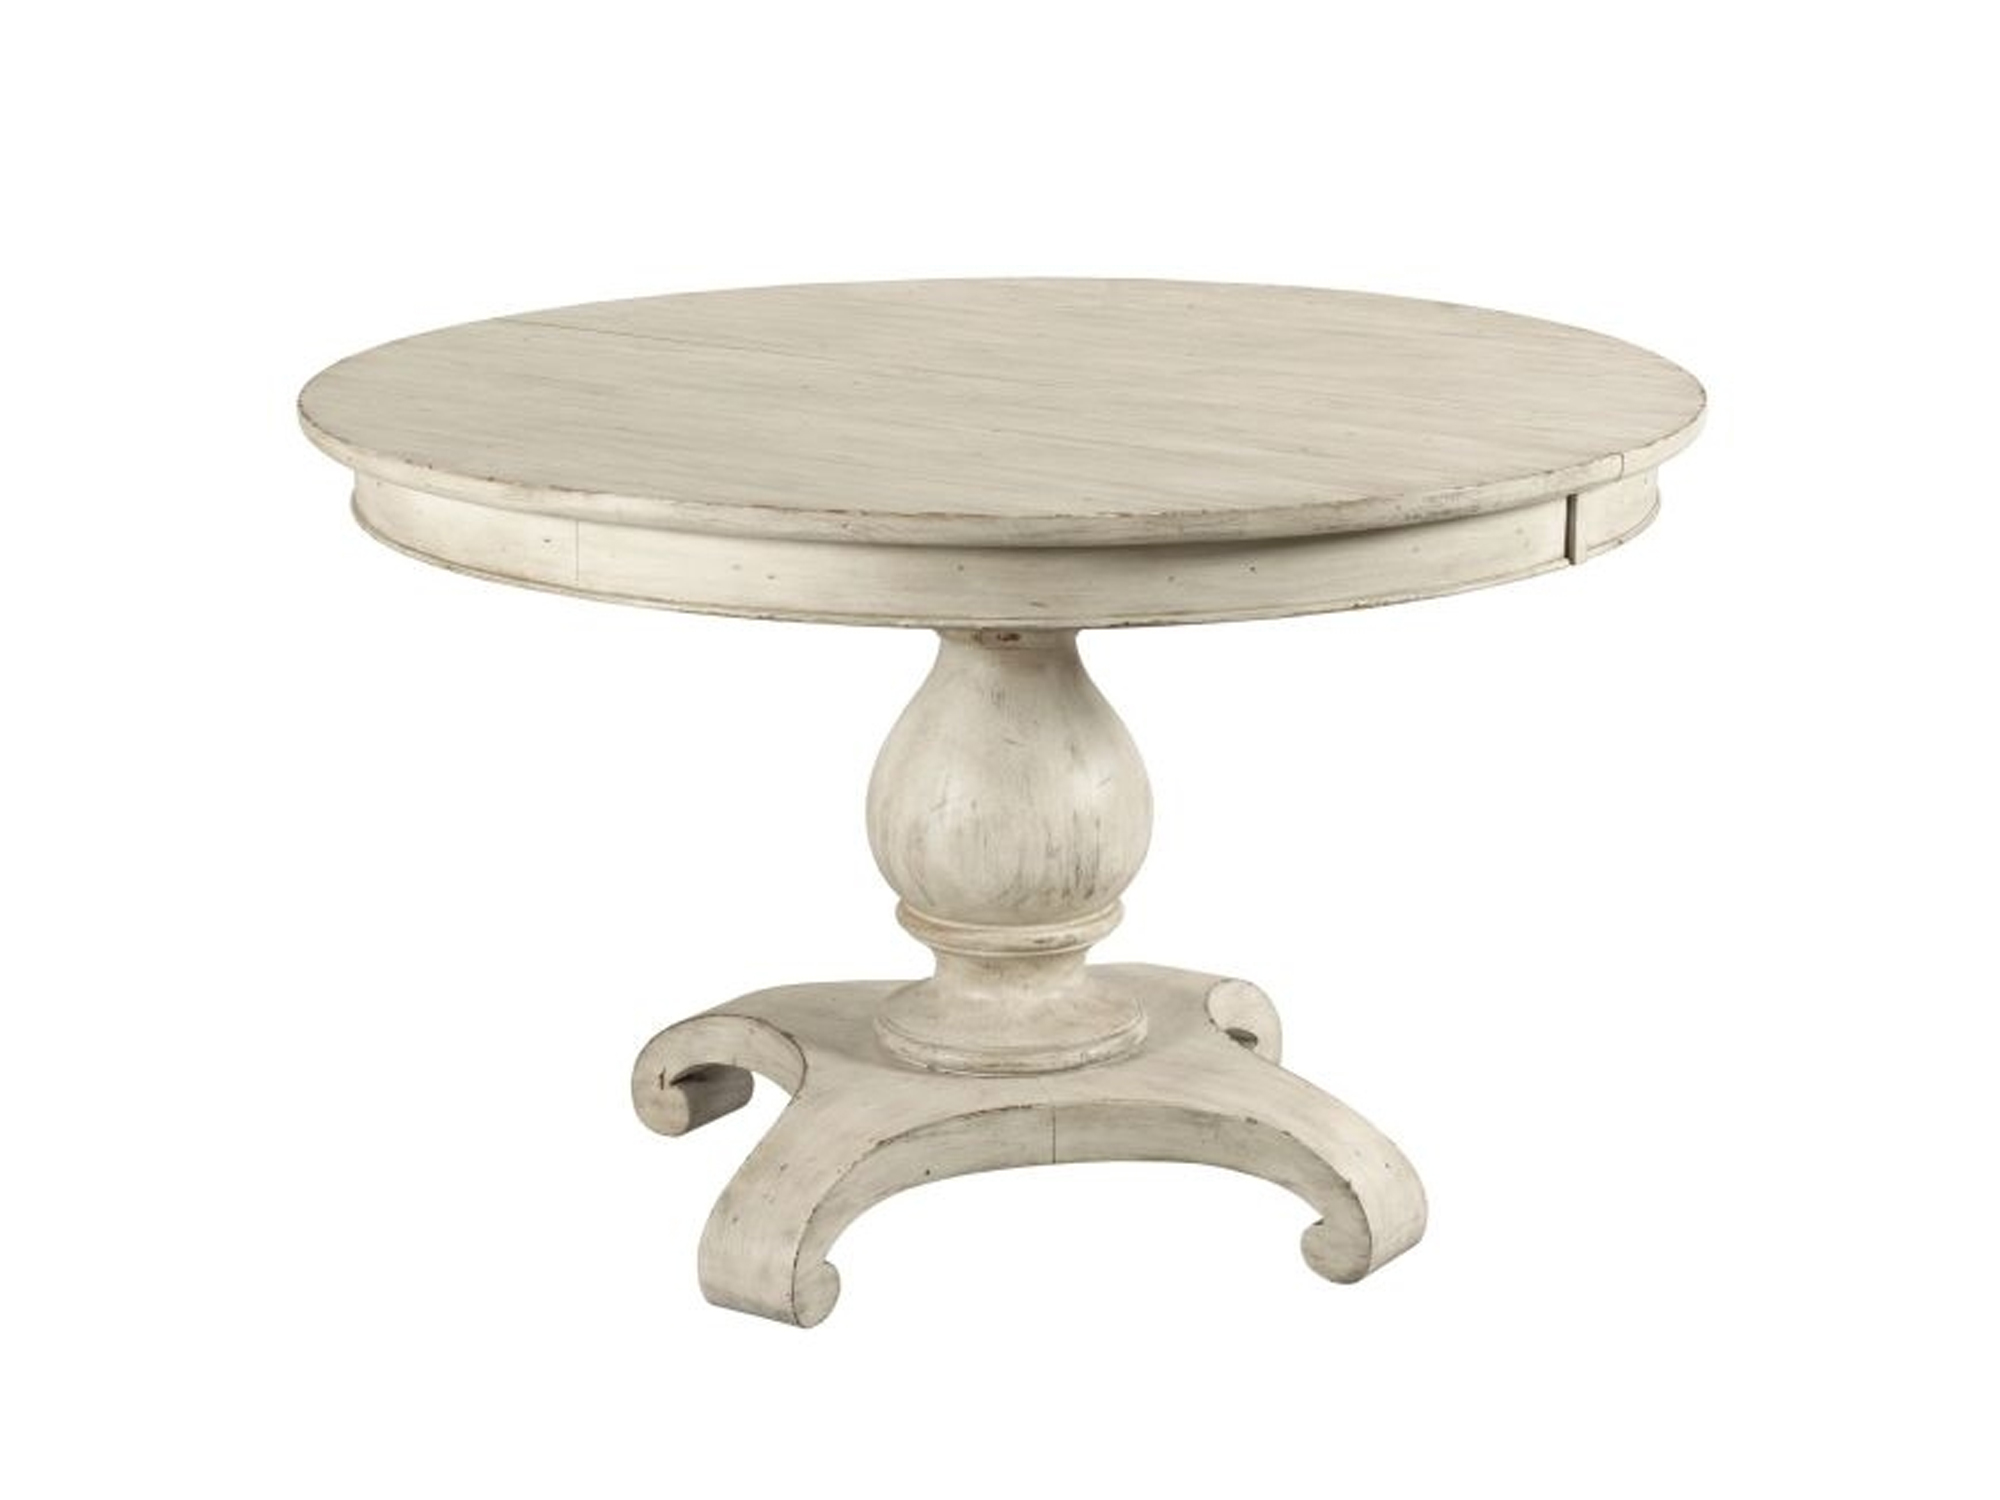 Selwyn Round Dining Table